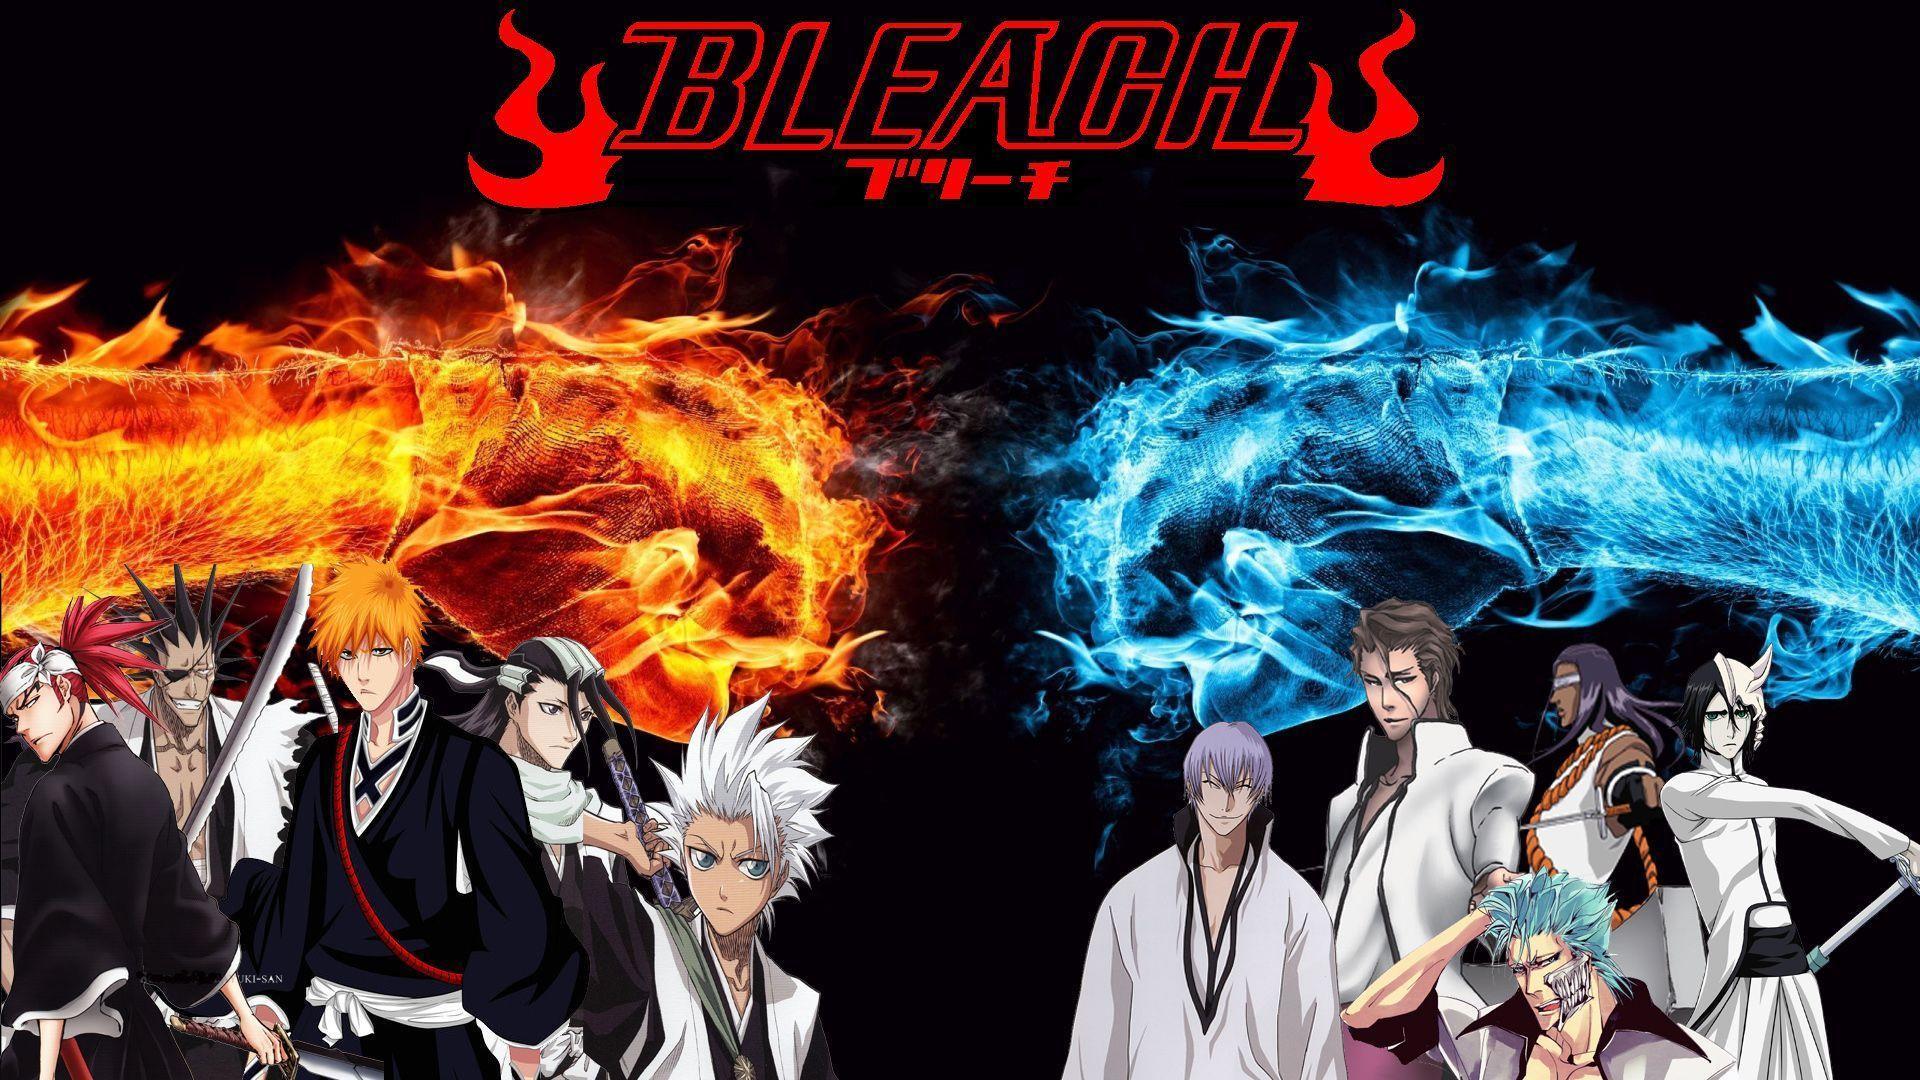 Bleach Character Image